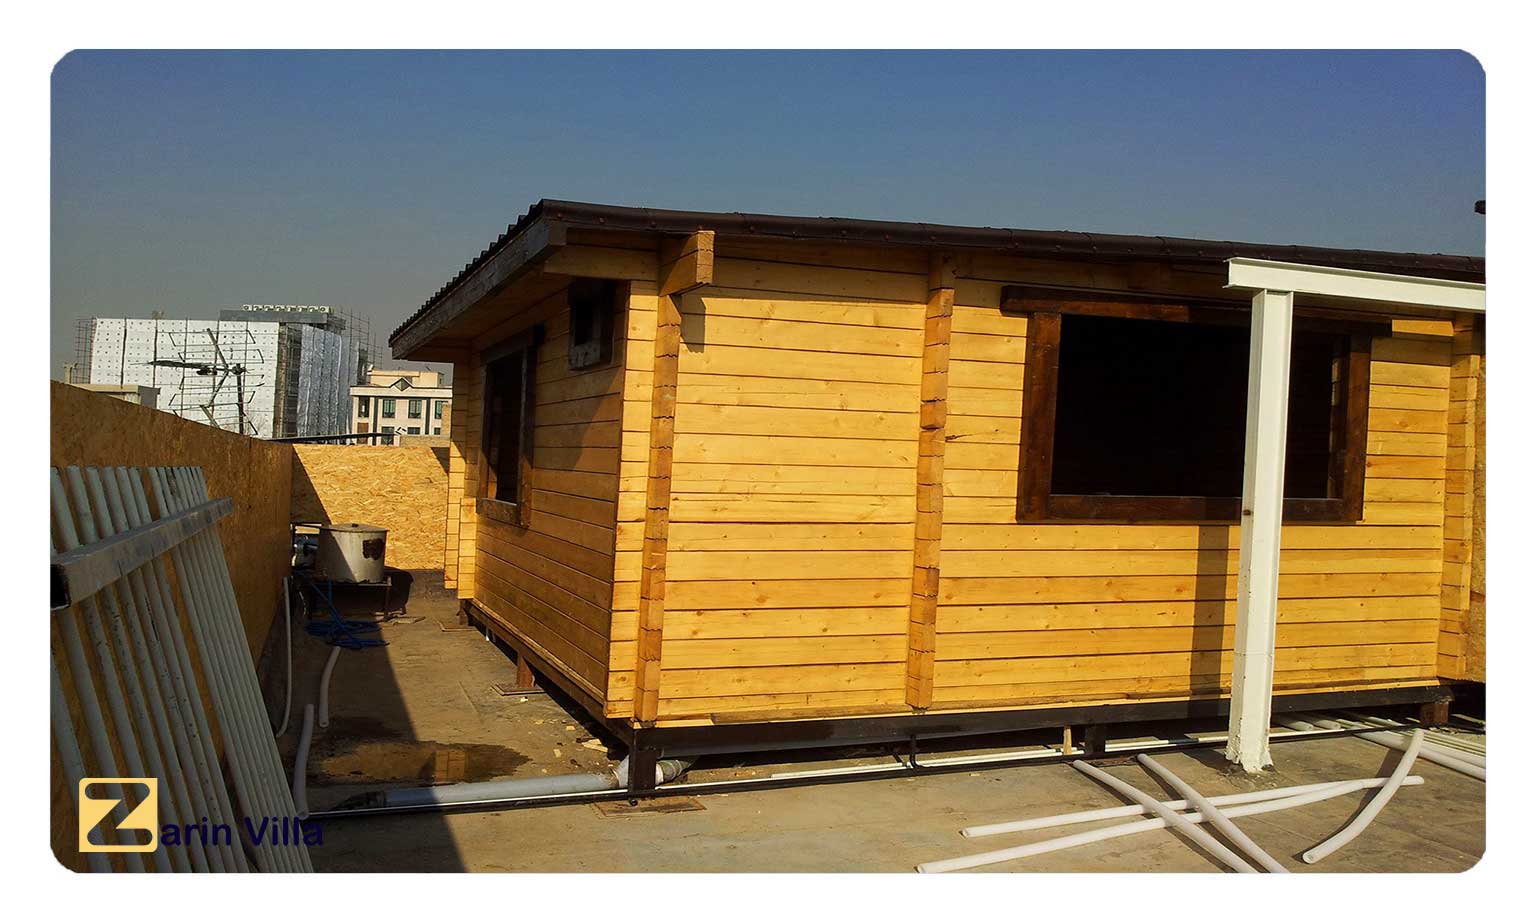 The price of a 30-meter prefabricated house